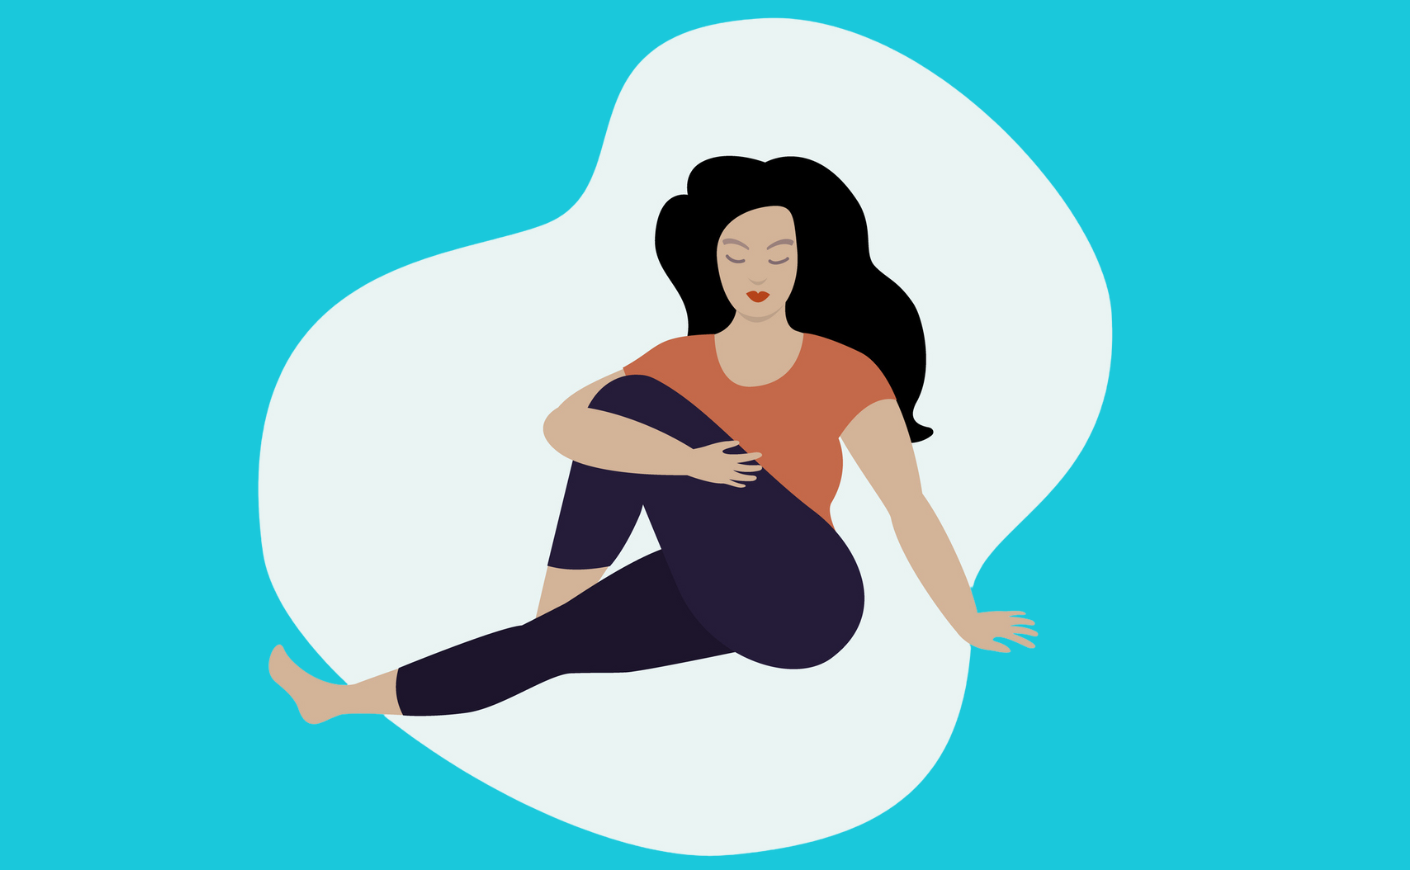 A peaceful looking cartoon woman performs an easy hip opening stretch.